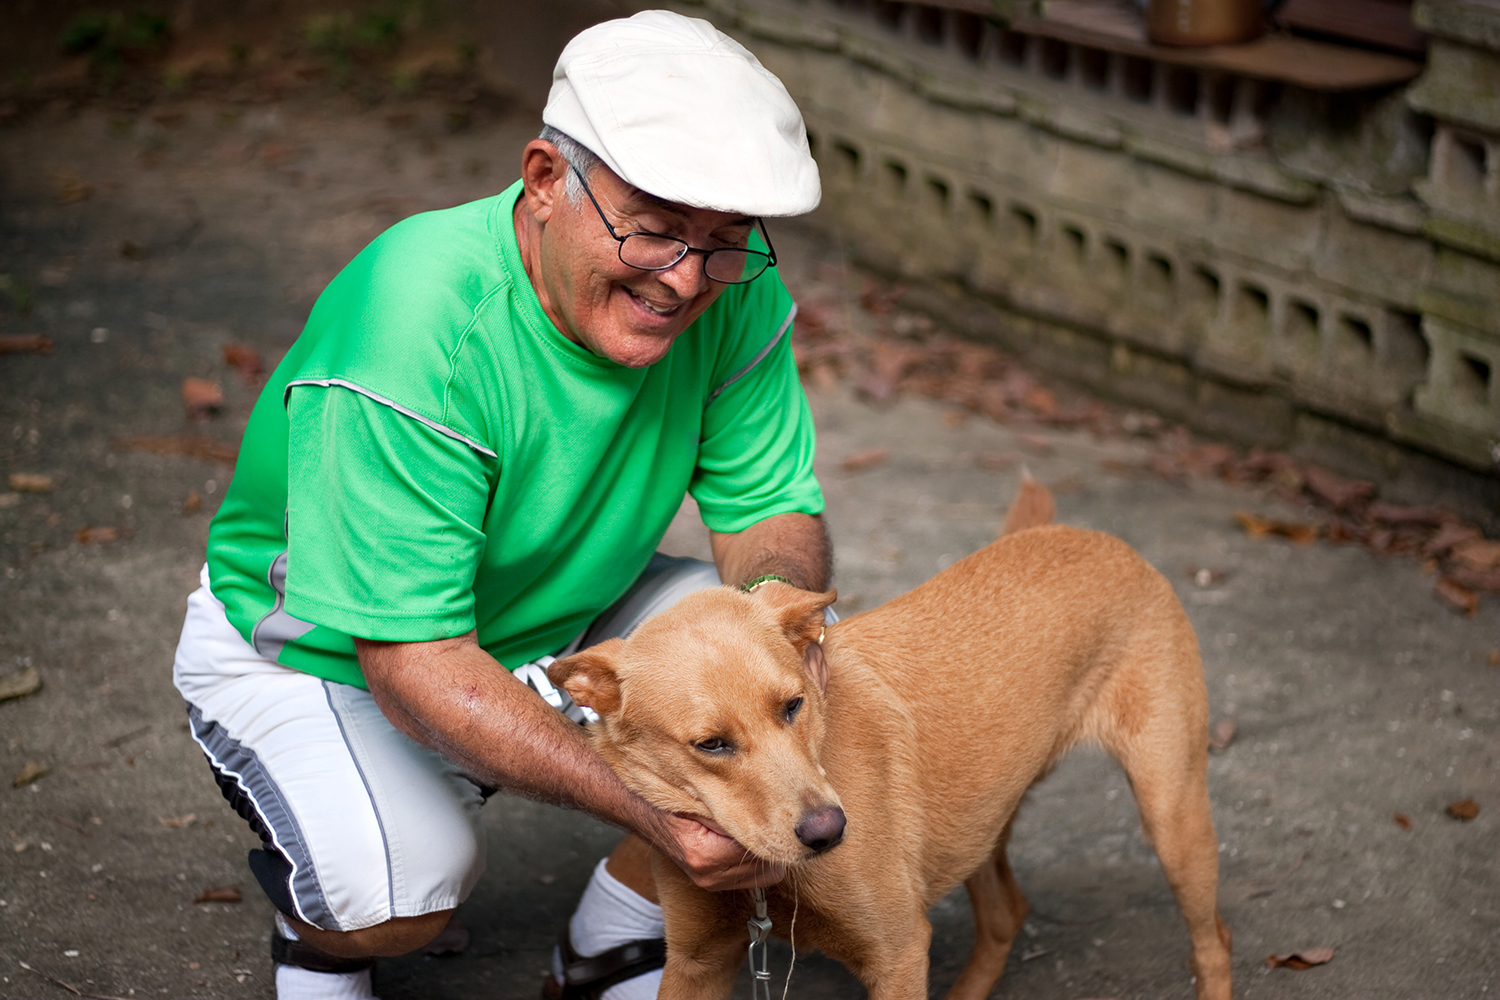 An elderly Hispanic senior citizen man petting his dog with a large smile on his face.